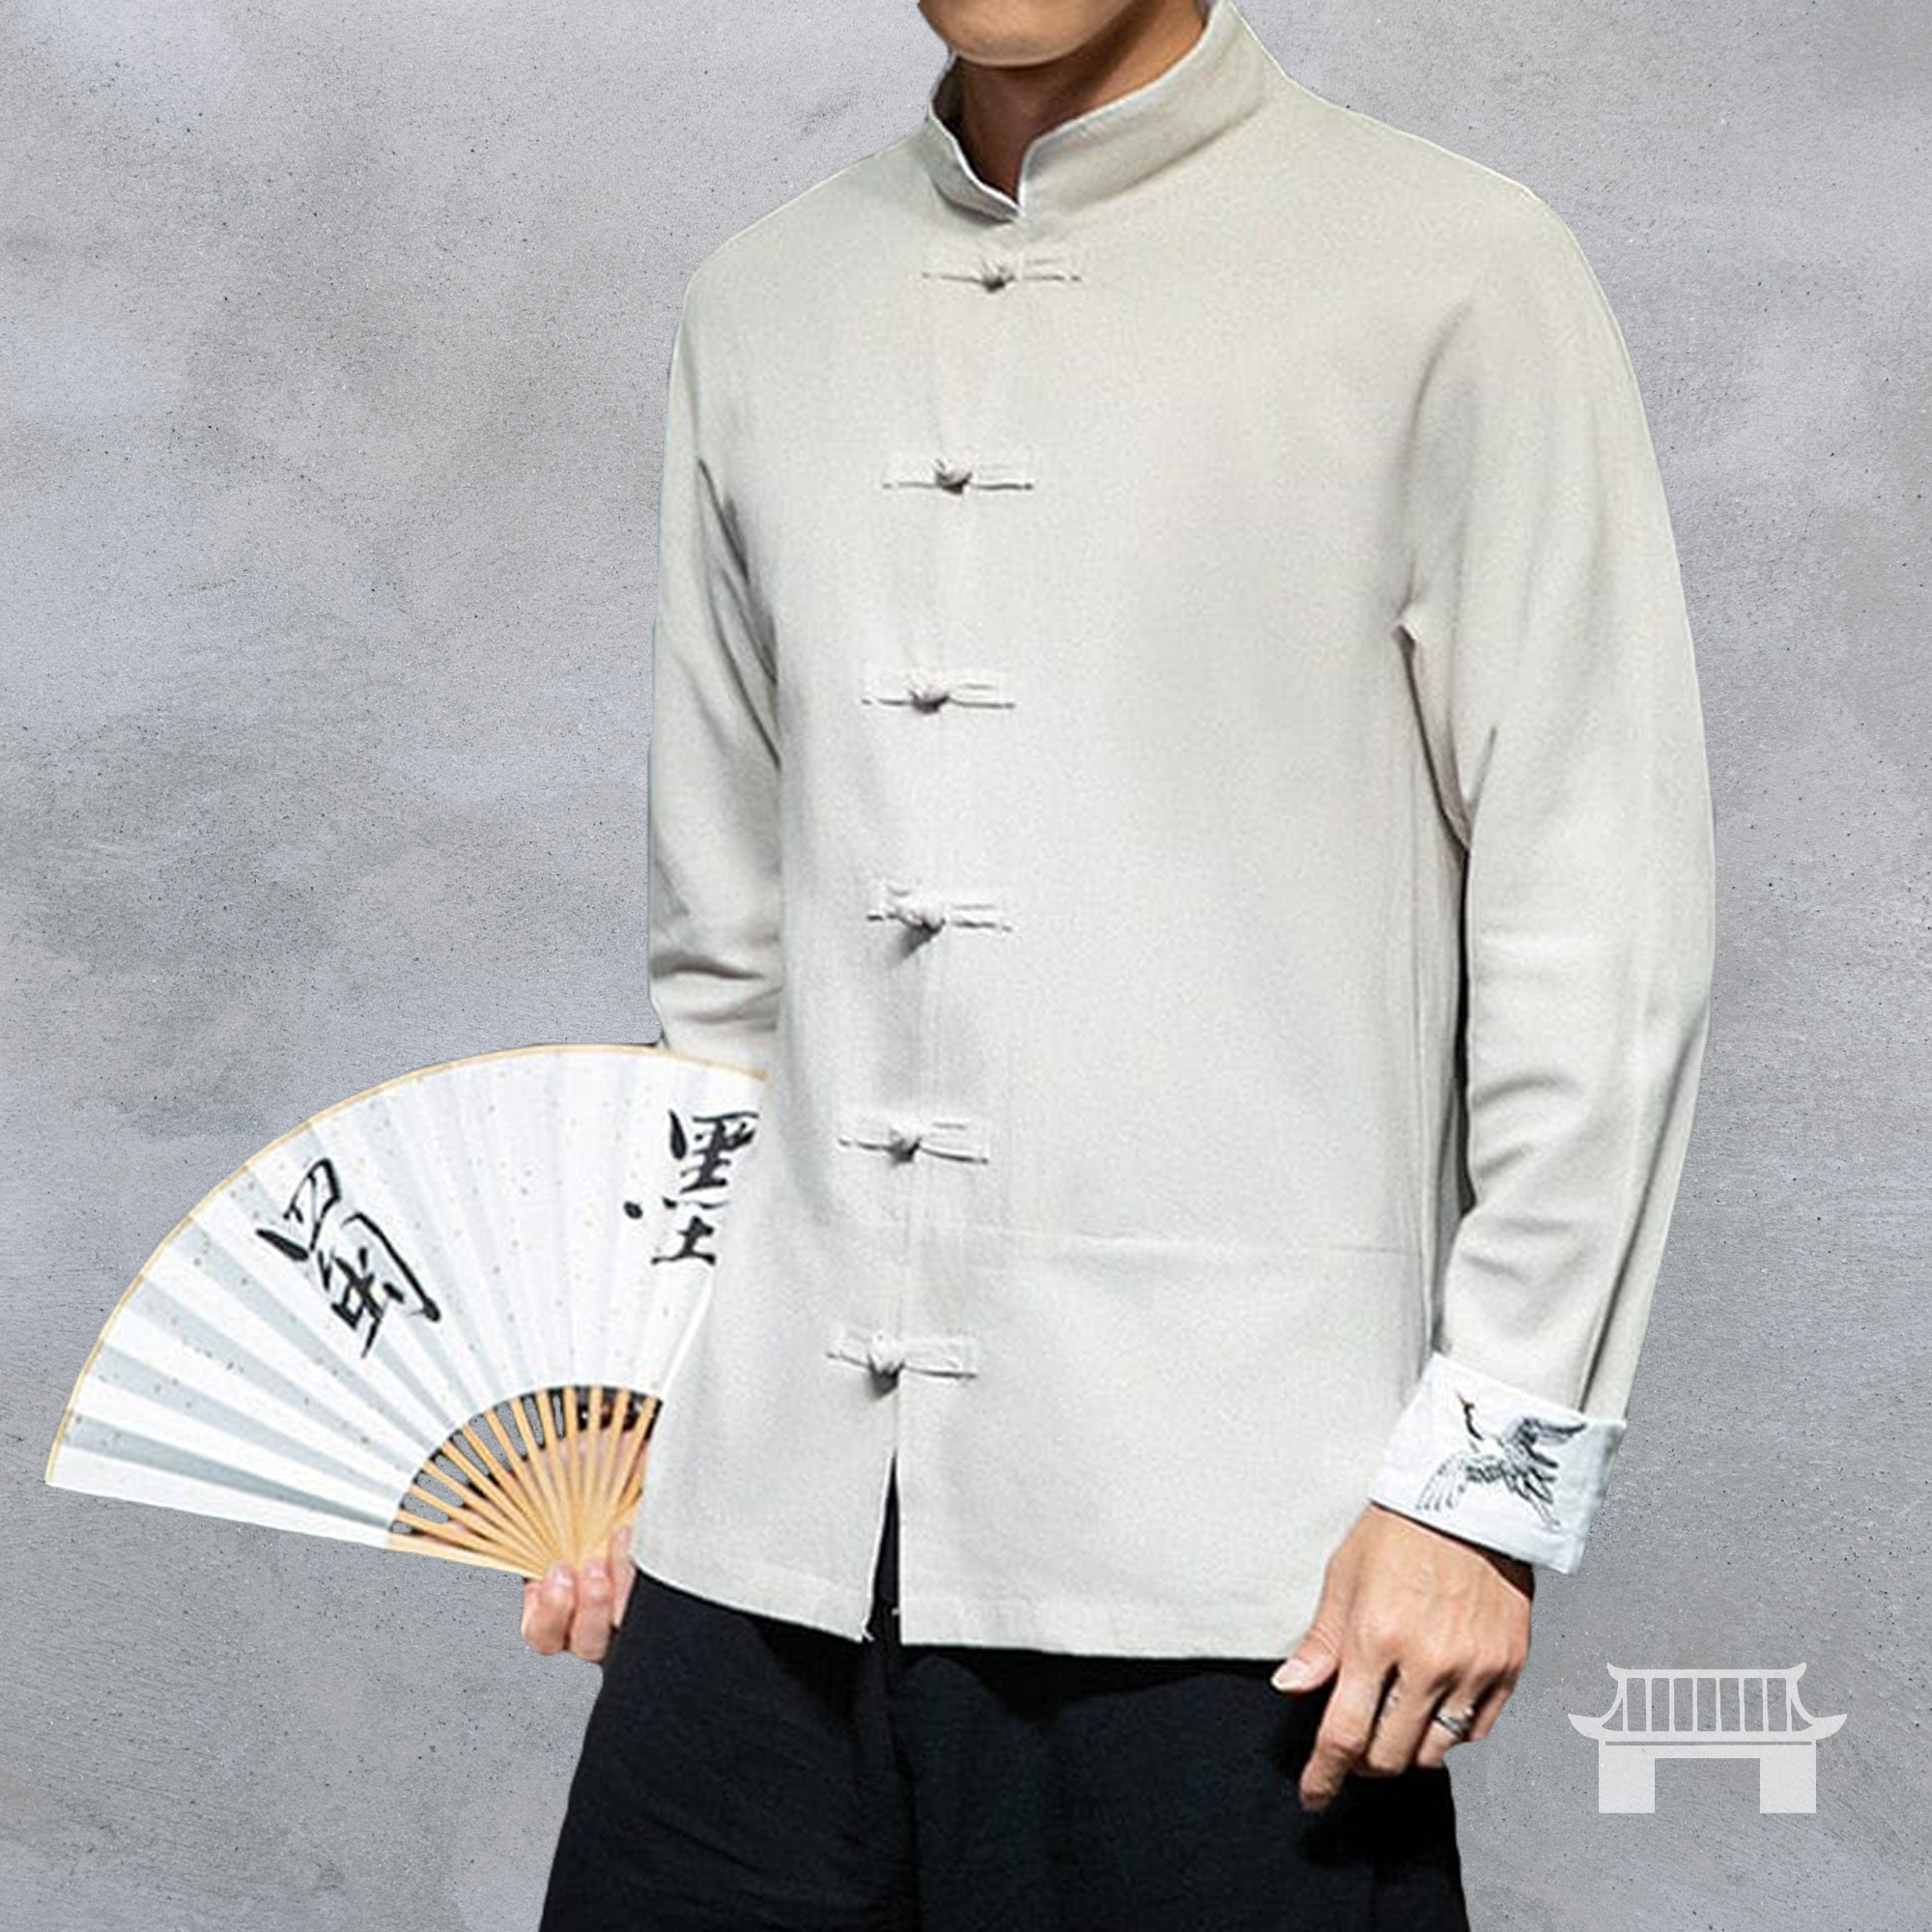 Xinyuan Hanfu Embroidery Tang Suit